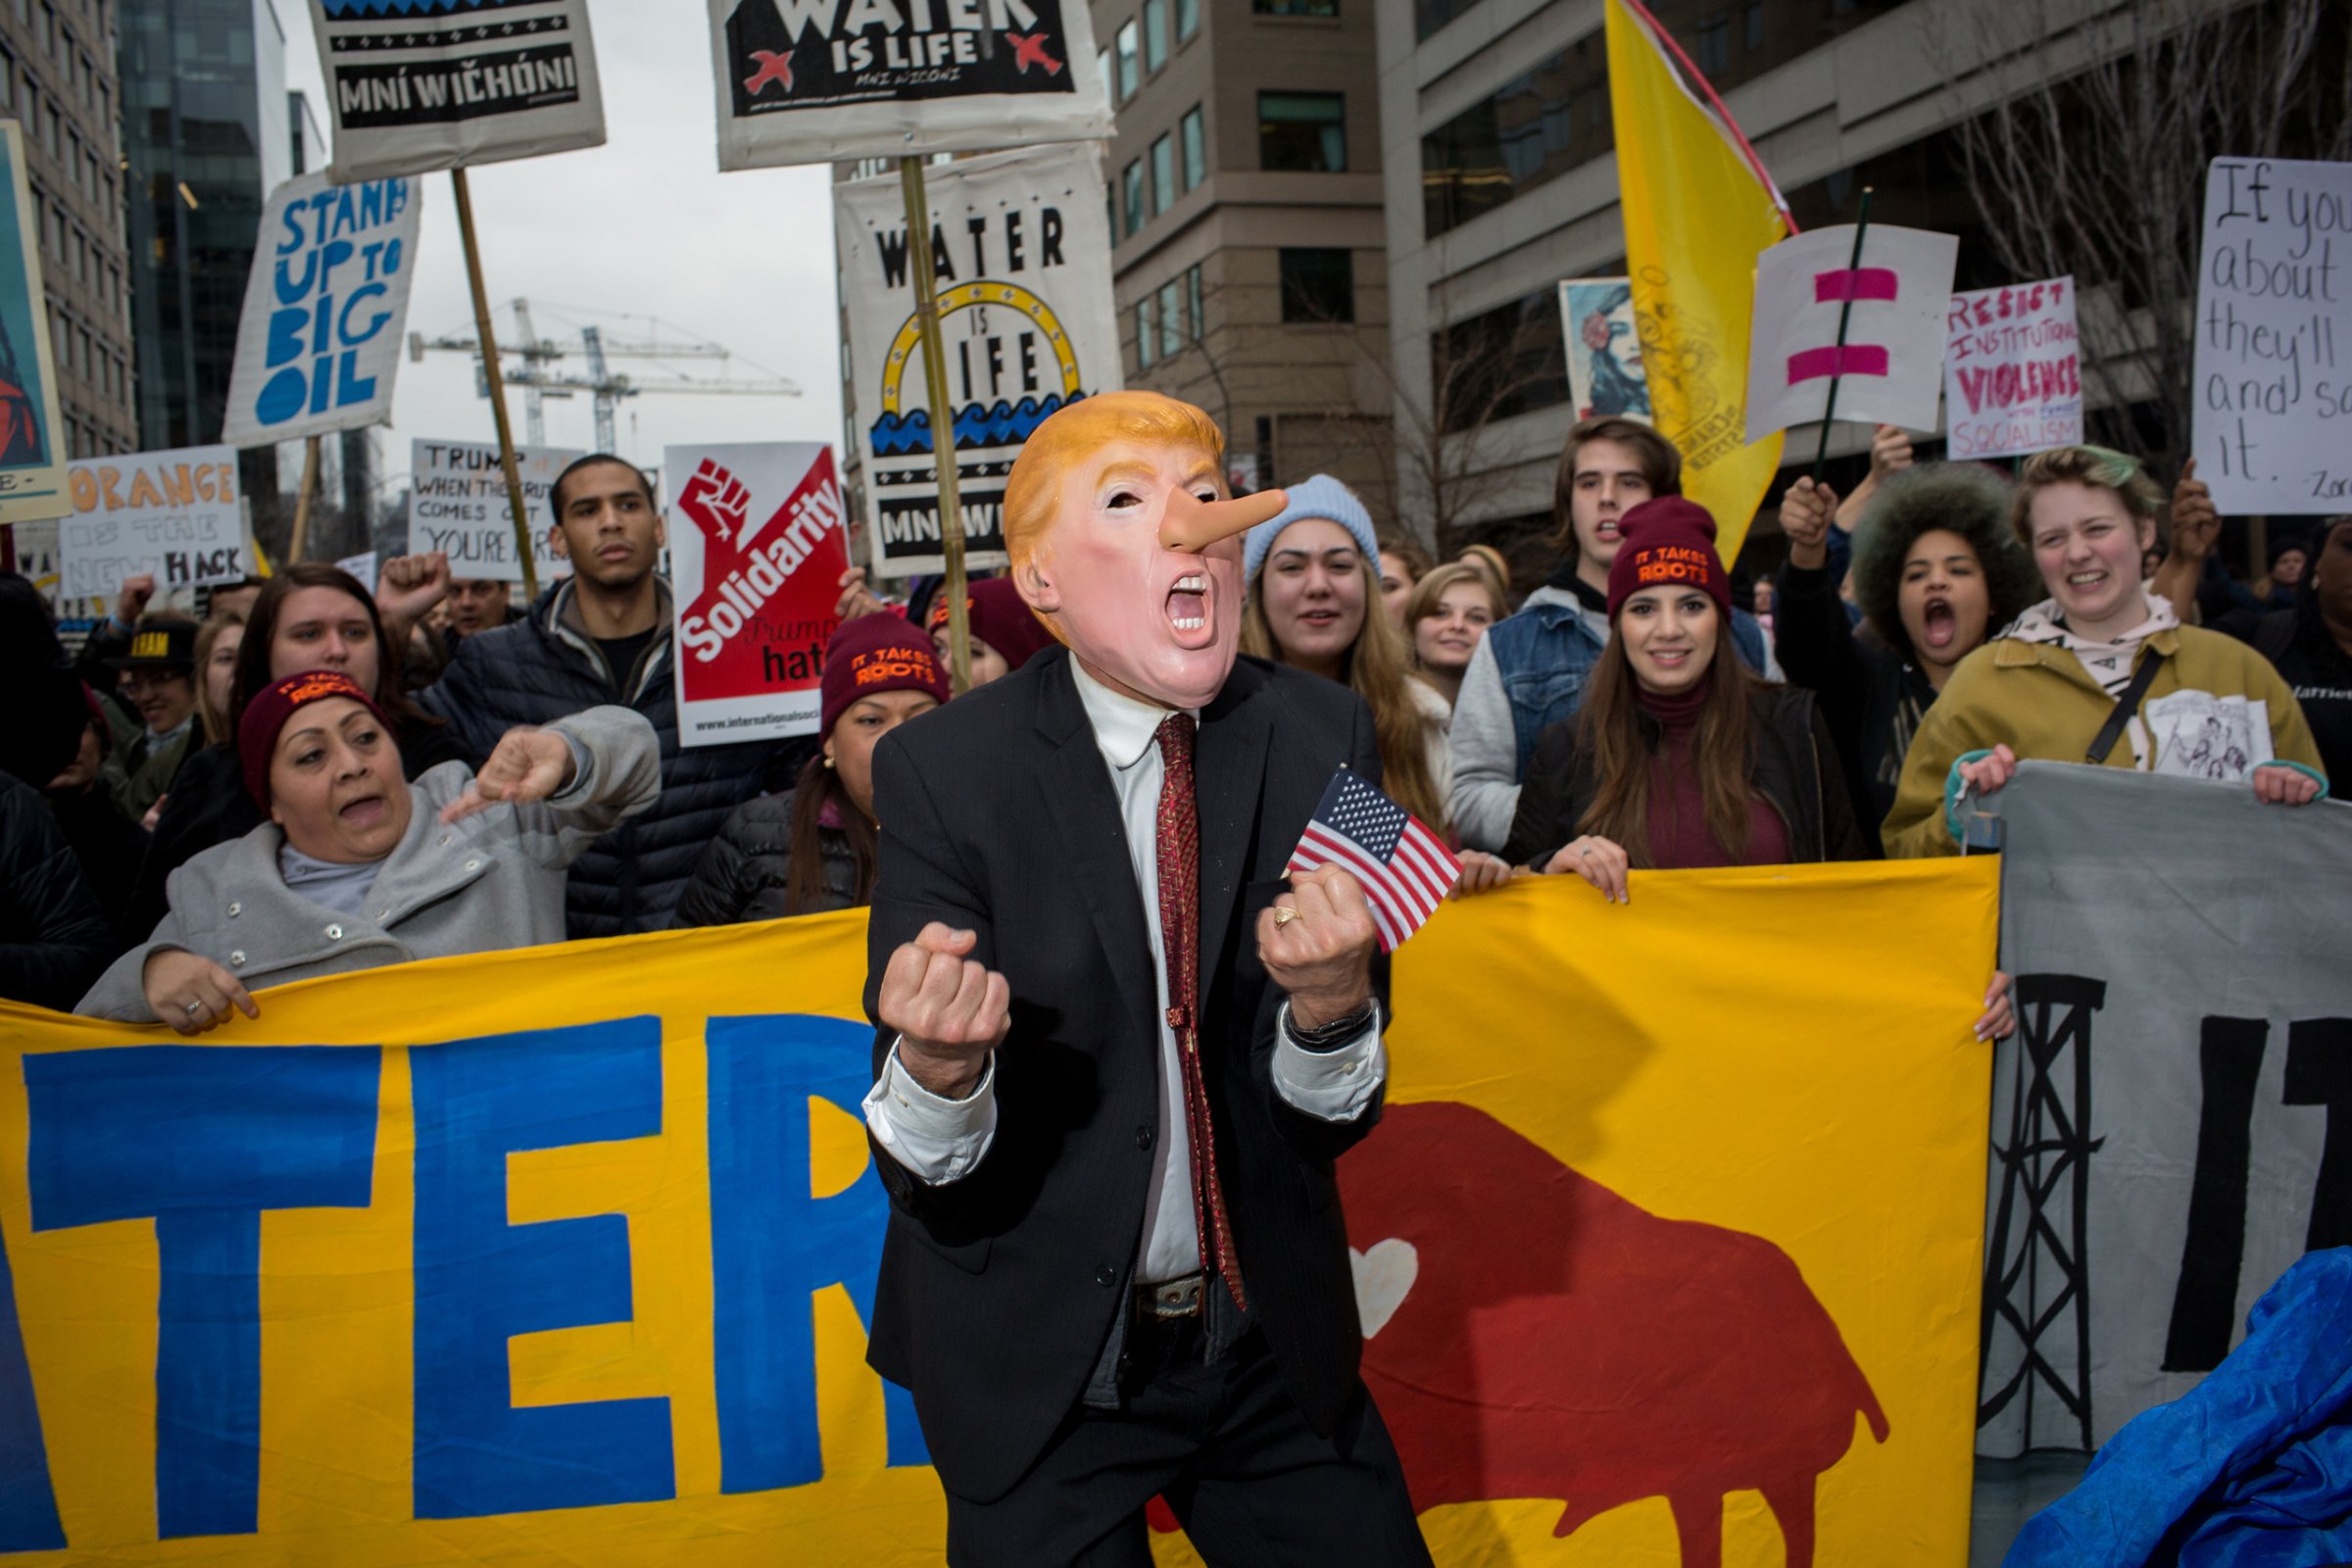 Protesters demonstrate on the streets of DC on Inauguration Day, Jan. 20, 2017.